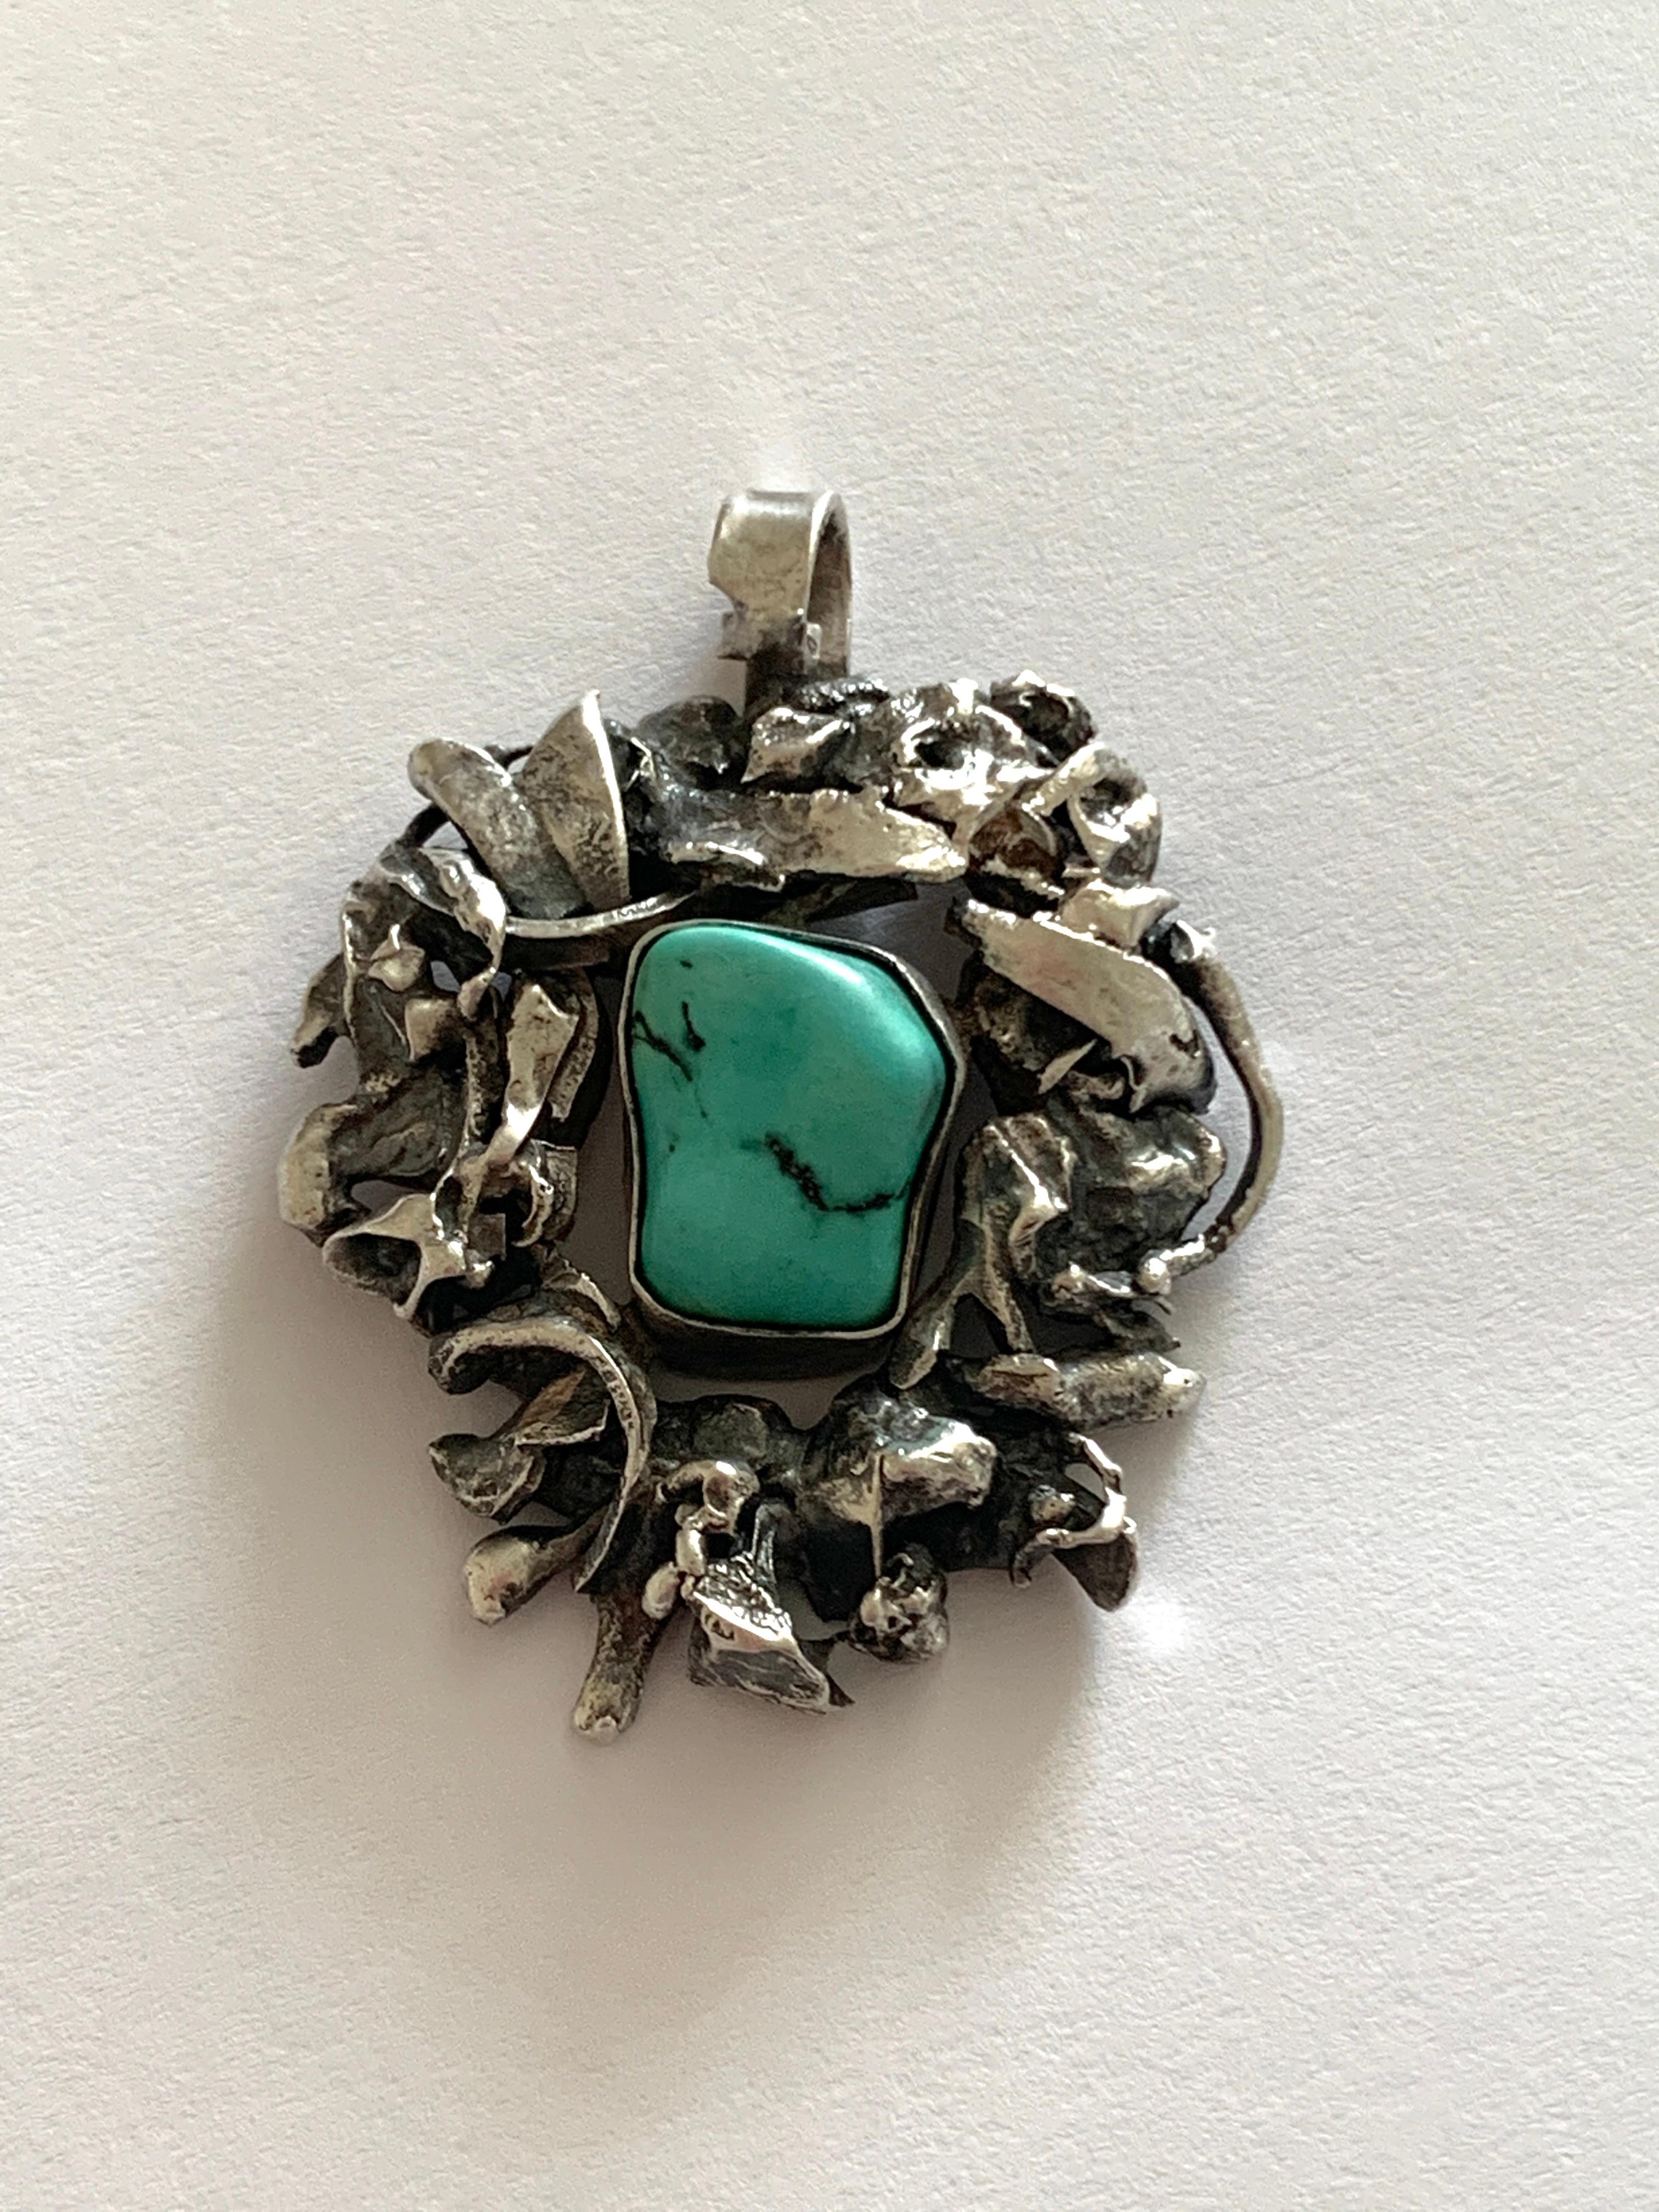 Beautiful Handmade Sterling Silver Brutalist Pendant
with a luxuriously smooth central turquoise stone.

unknown designer
Circa 1970s
Stamped on reverse 